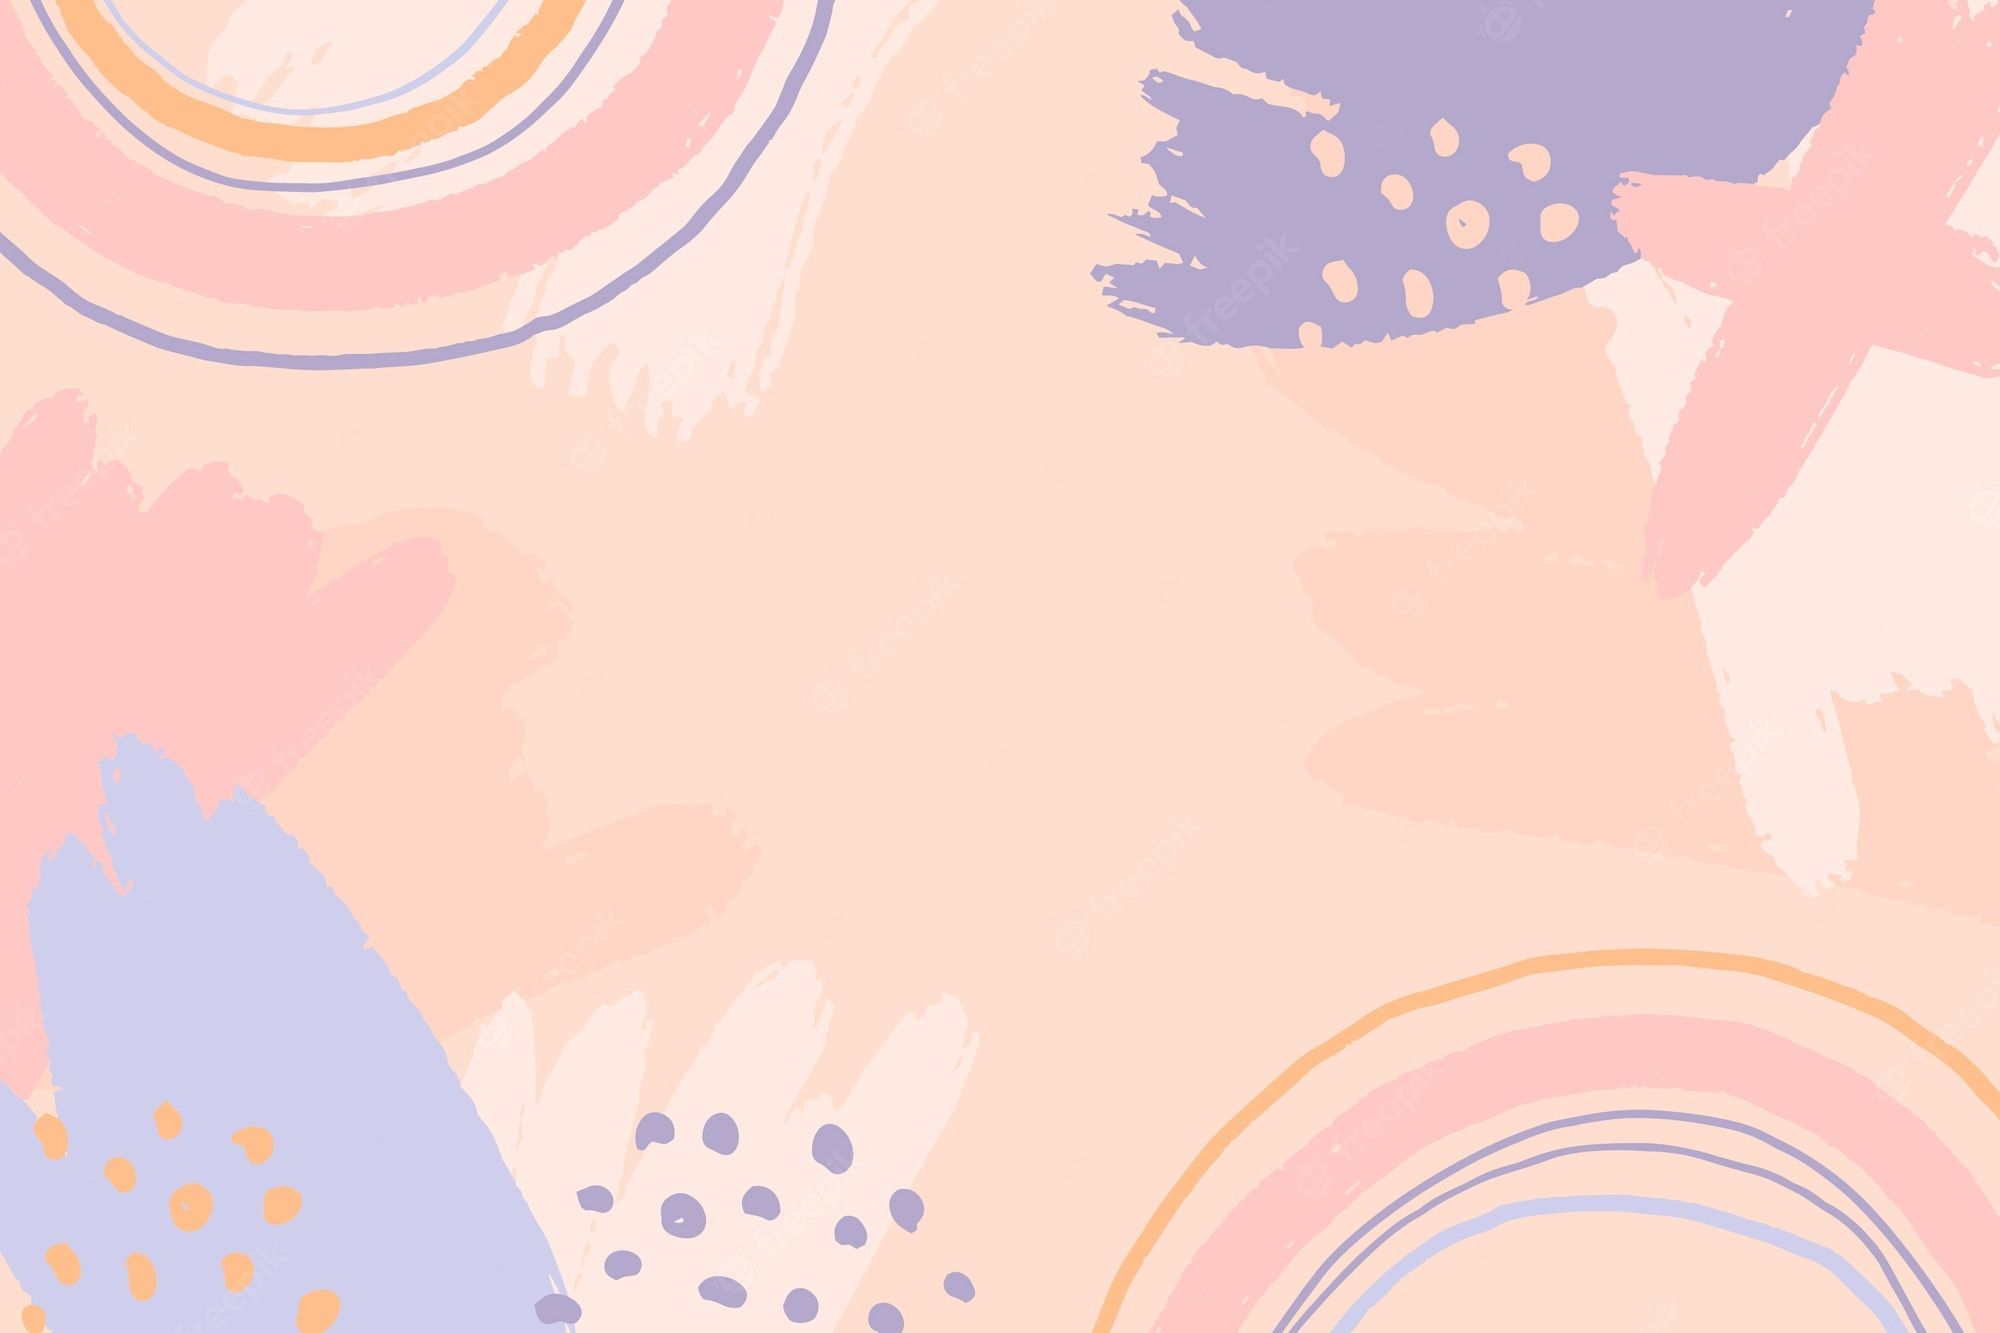 Abstract background with pink, purple and blue - Doodles